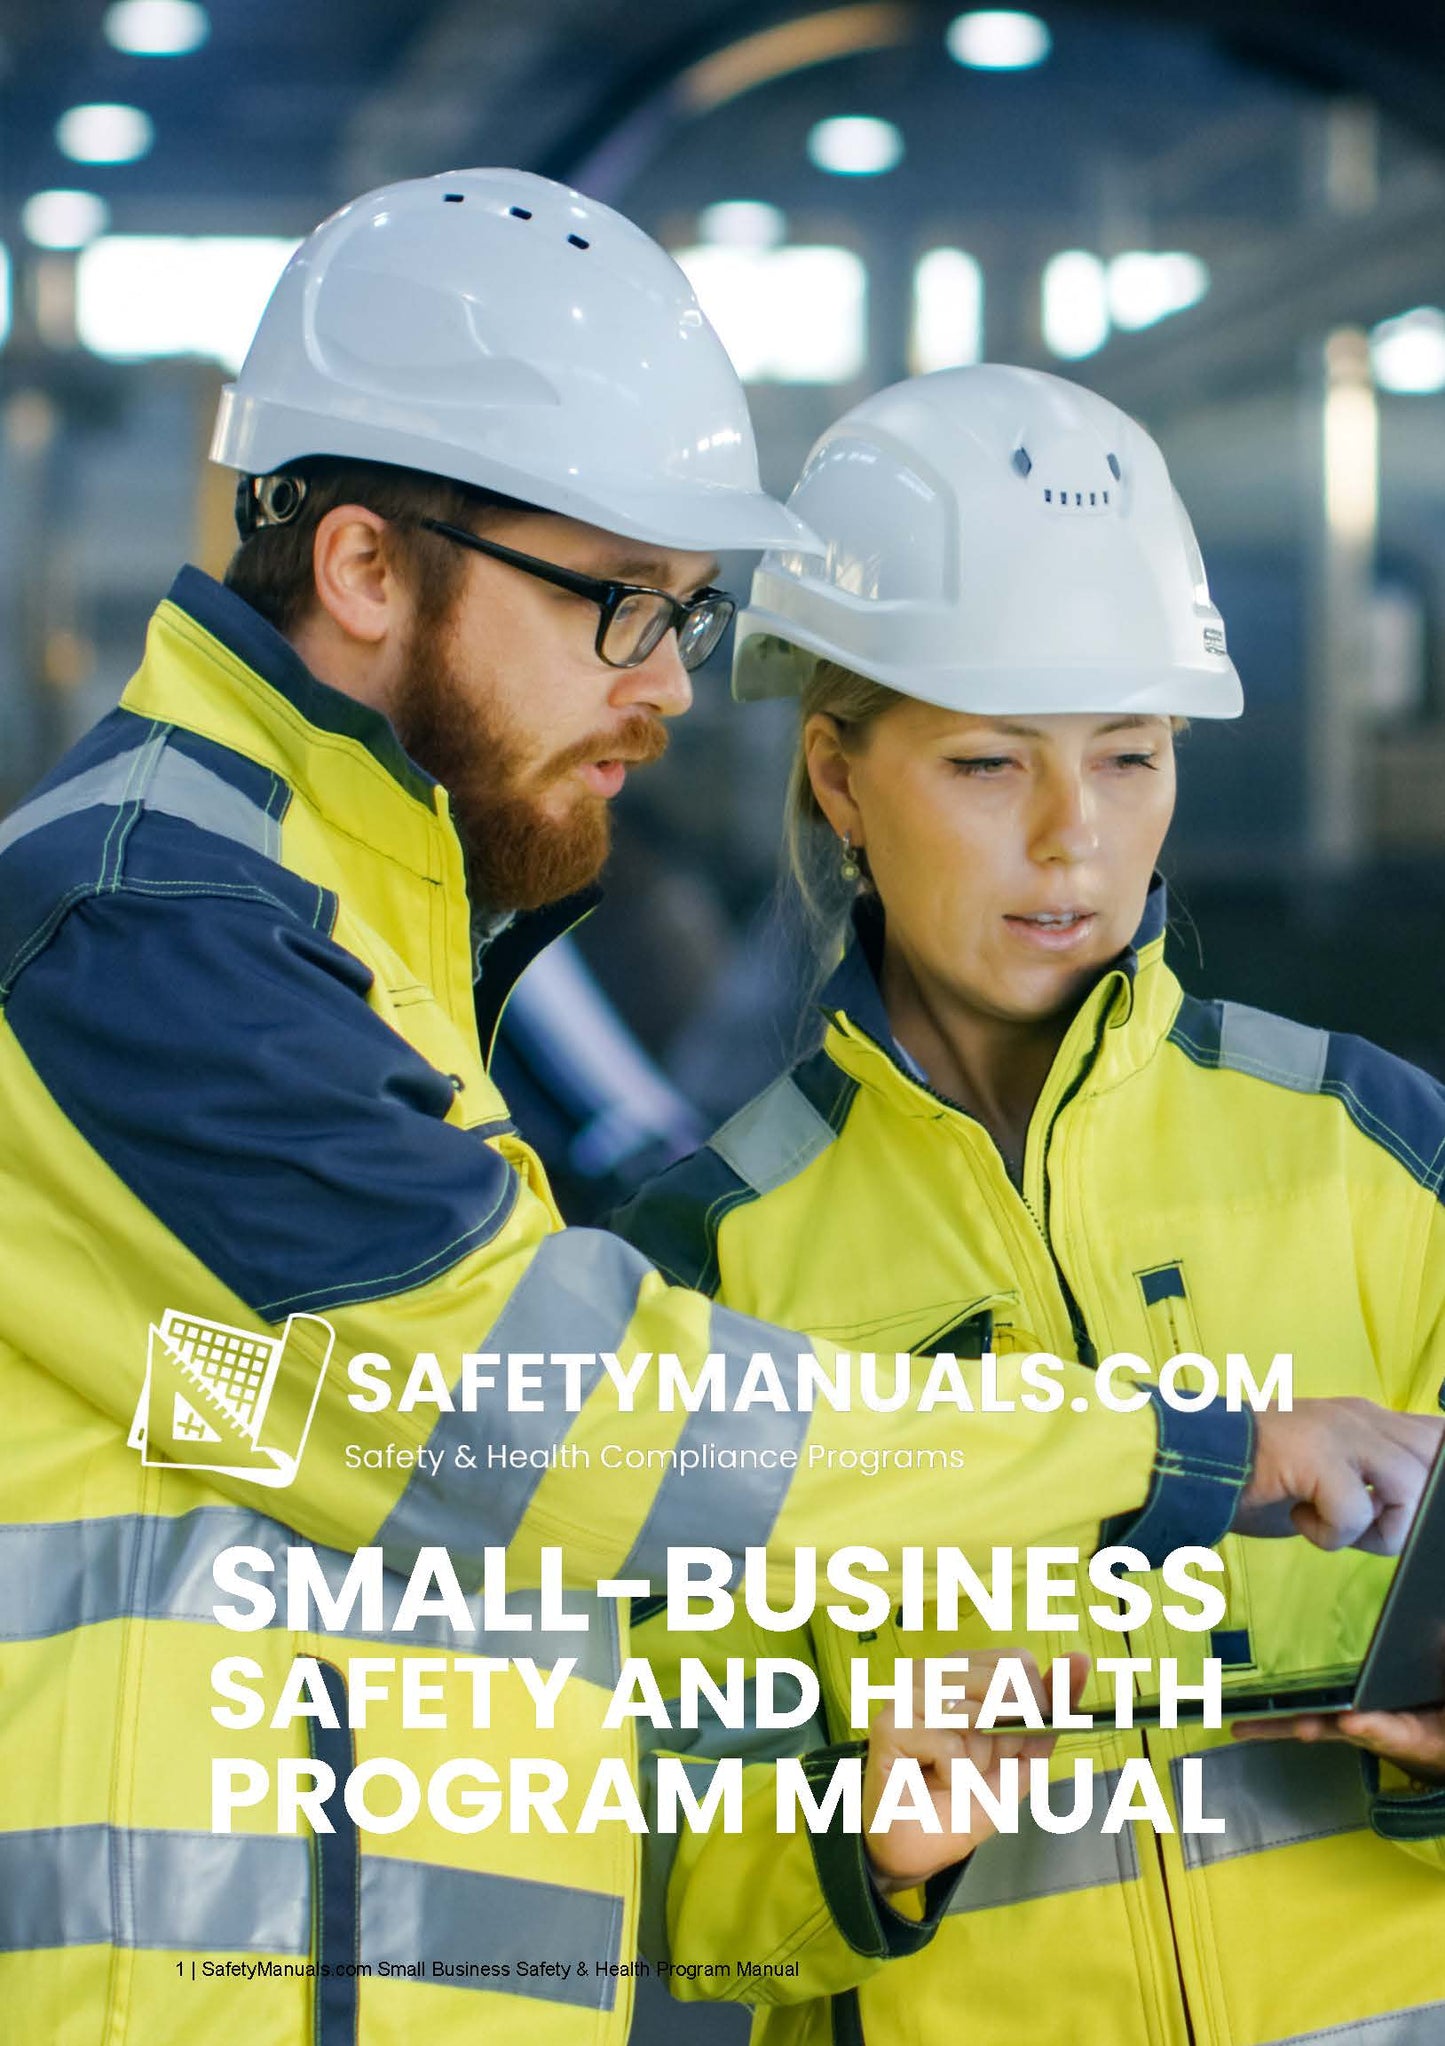 Small Business Safety & Health Program